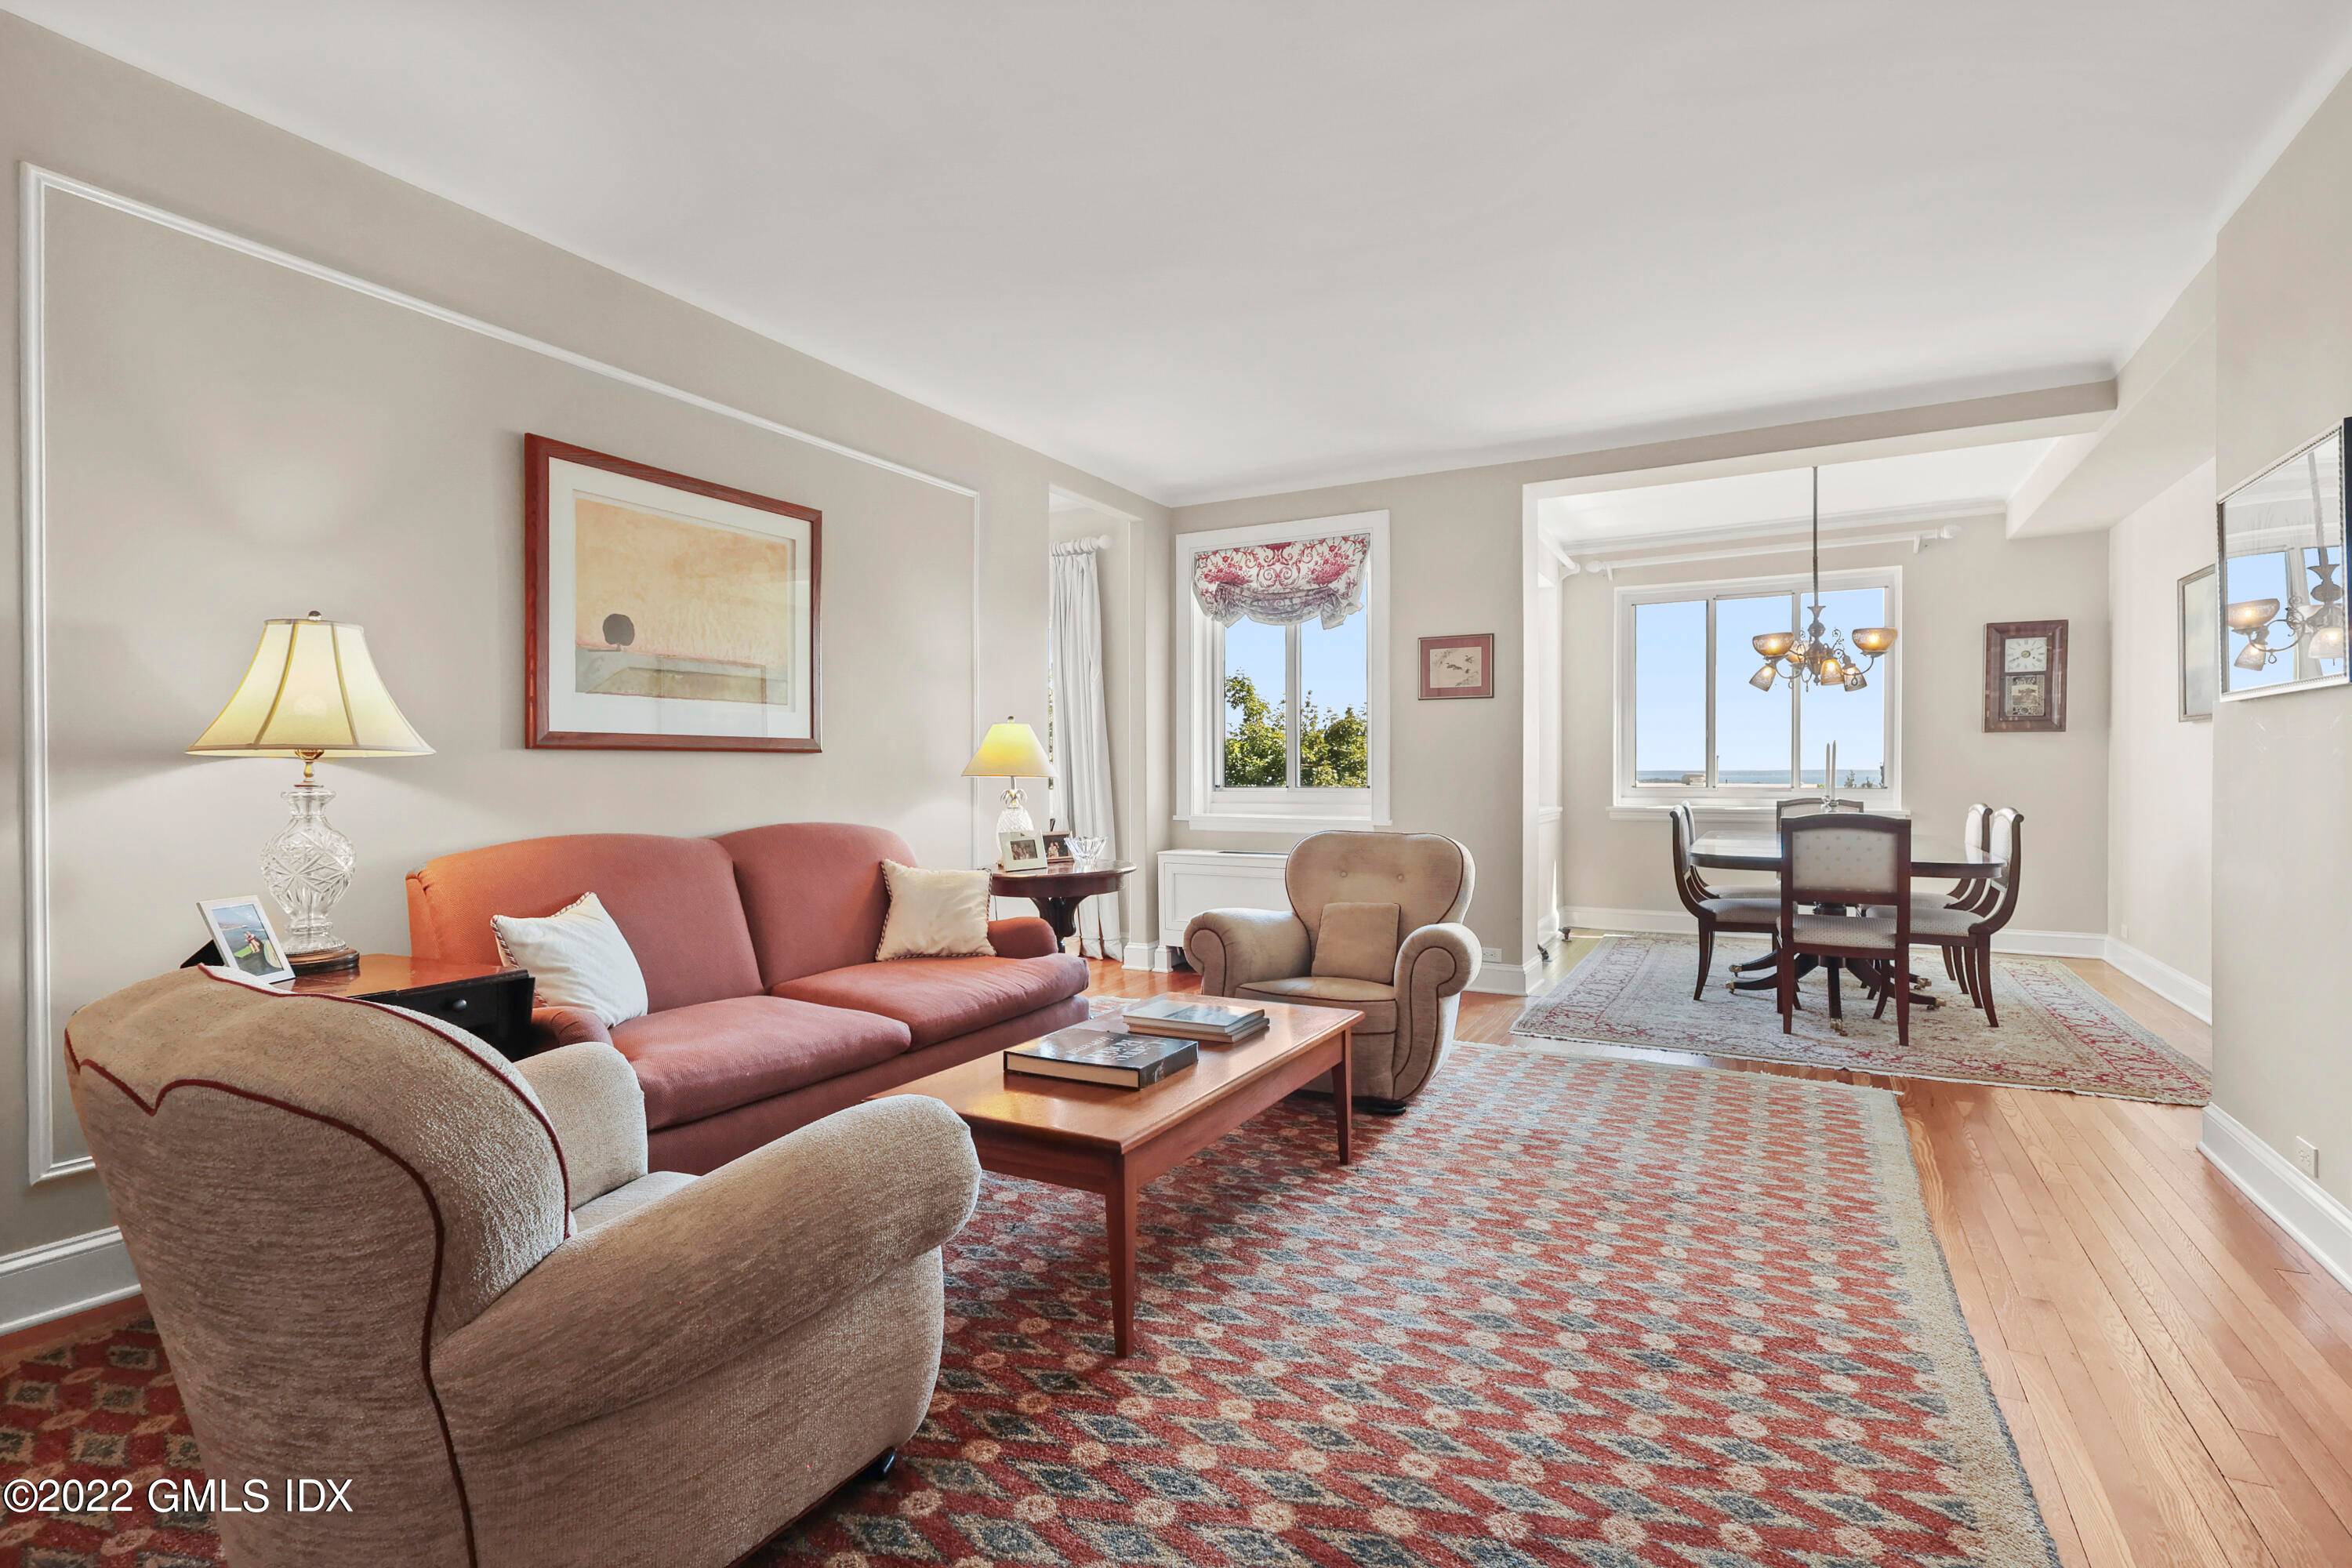 Panoramic views of Long Island Sound and the Manhattan skyline from every room define this gut renovated 5th floor unit in the refurbished and landmarked Greenwich Lodge.